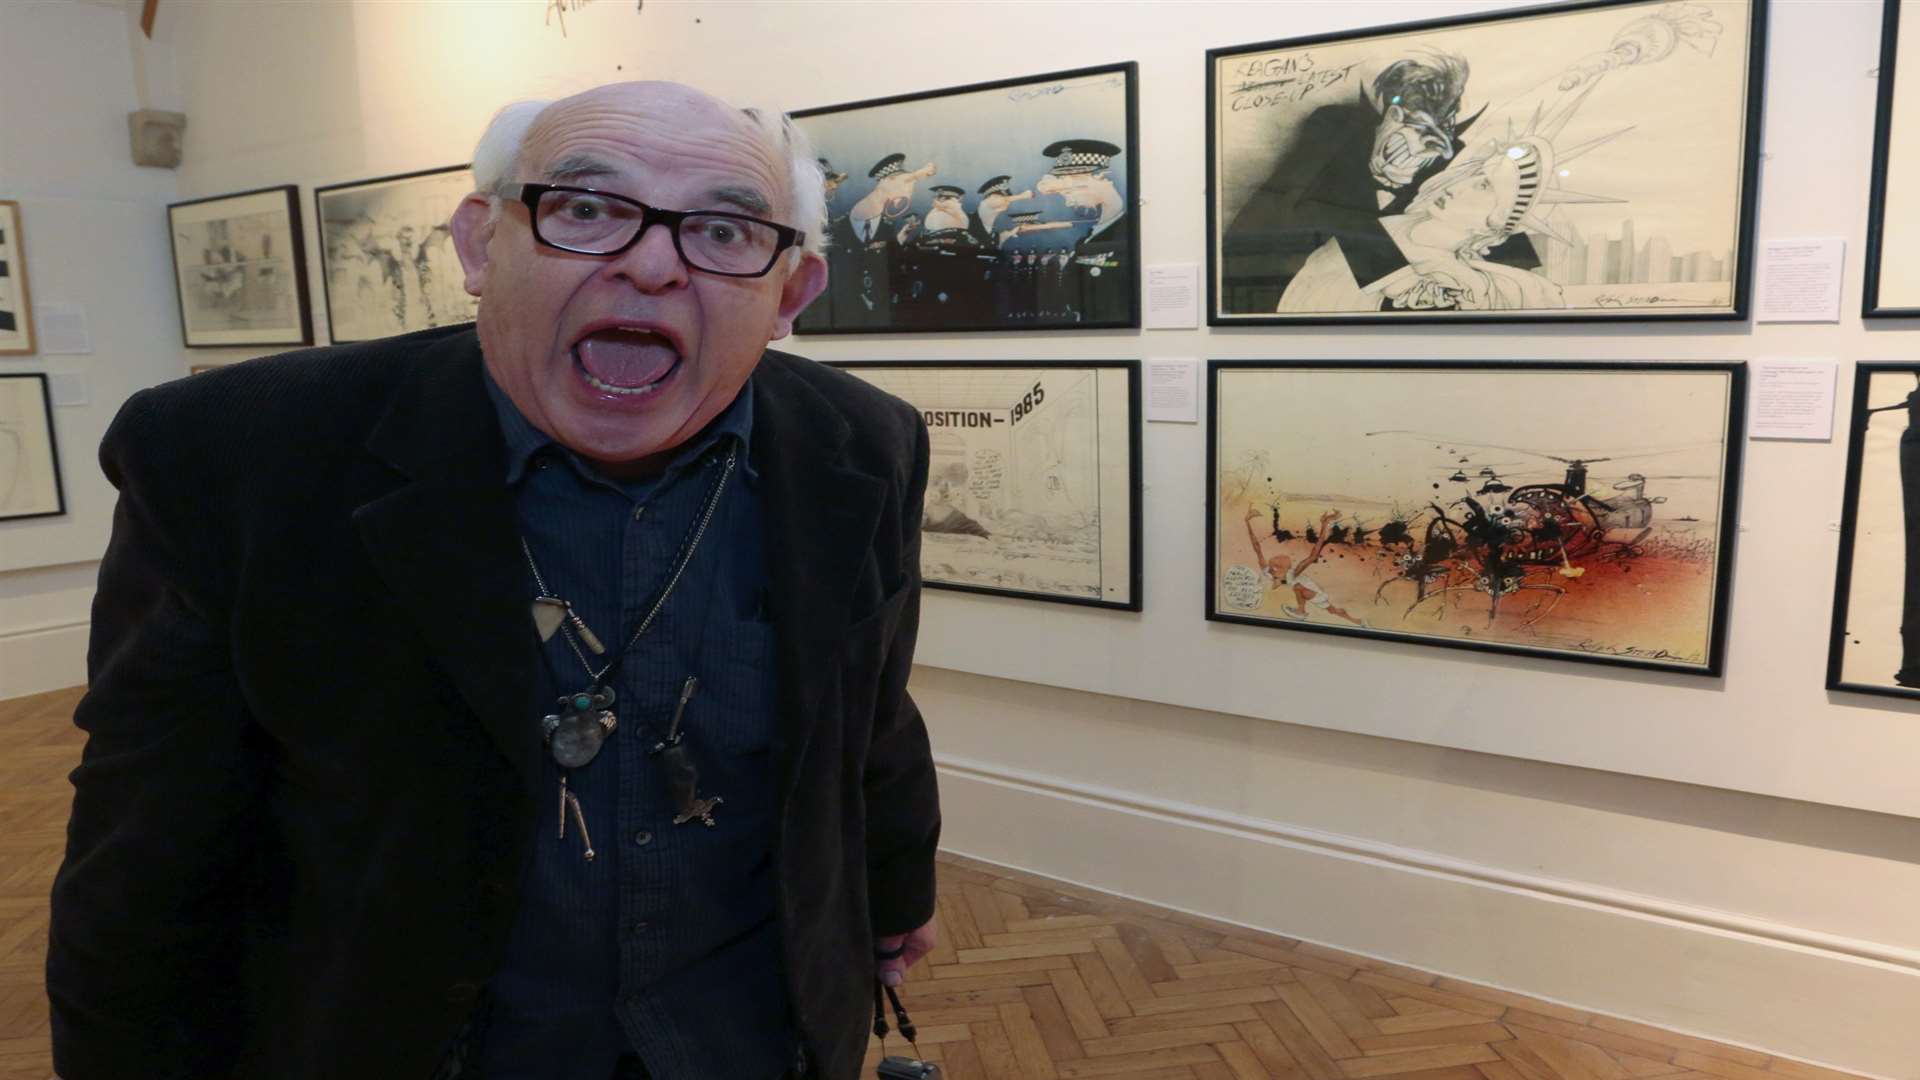 Ralph Steadman is best known for his work alongside famous American journalist Hunter S Thompson. Picture: Martin Apps